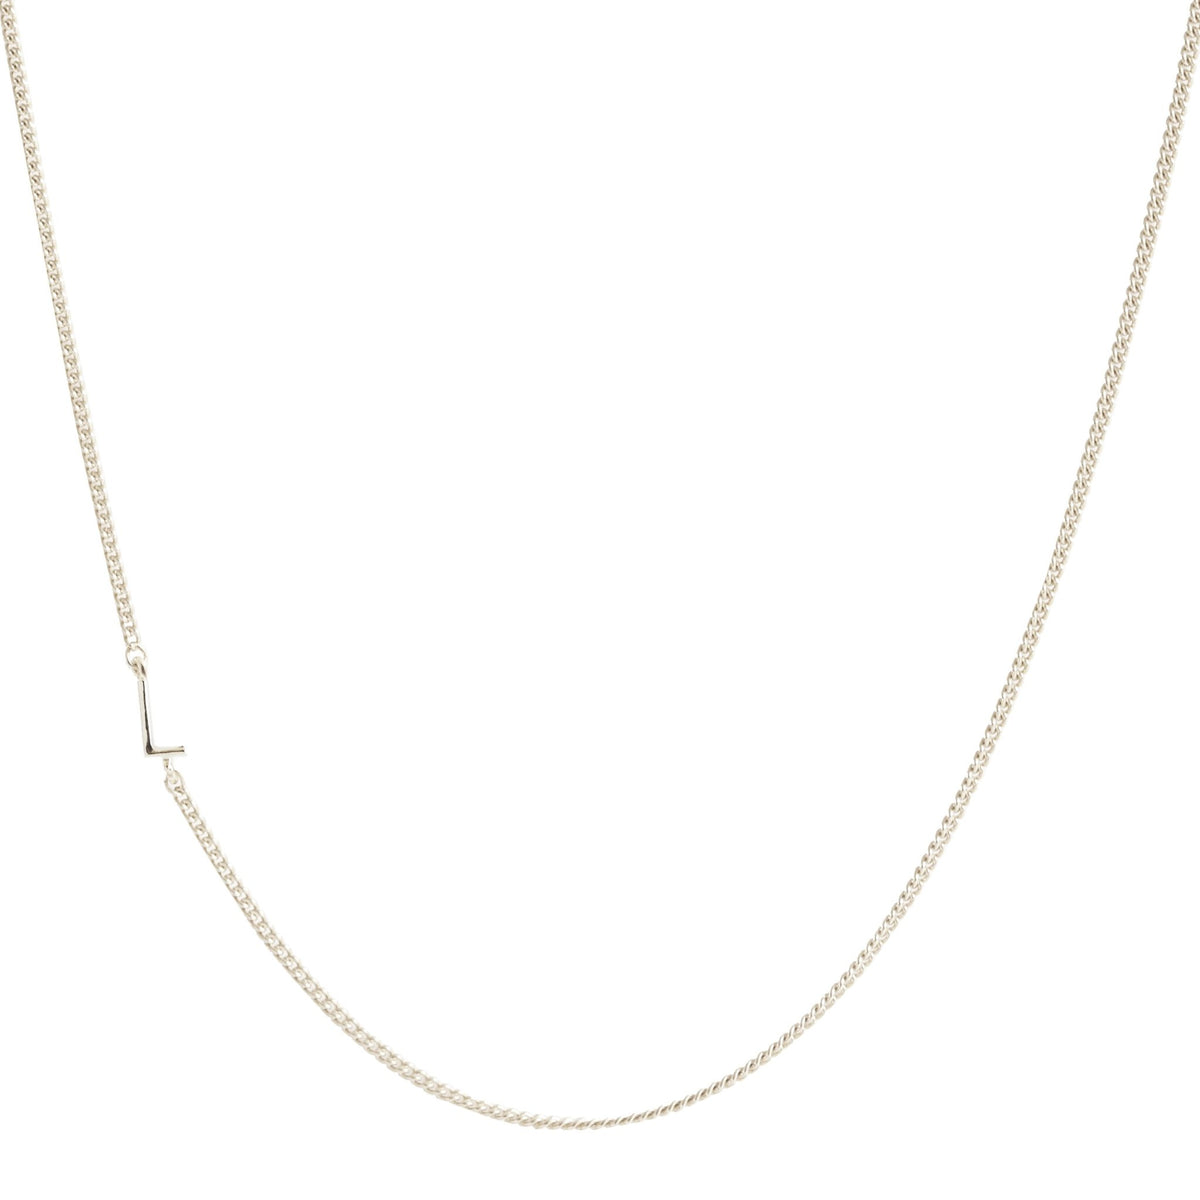 NOTABLE OFFSET INITIAL NECKLACE - L - GOLD, ROSE GOLD, OR SILVER - SO PRETTY CARA COTTER